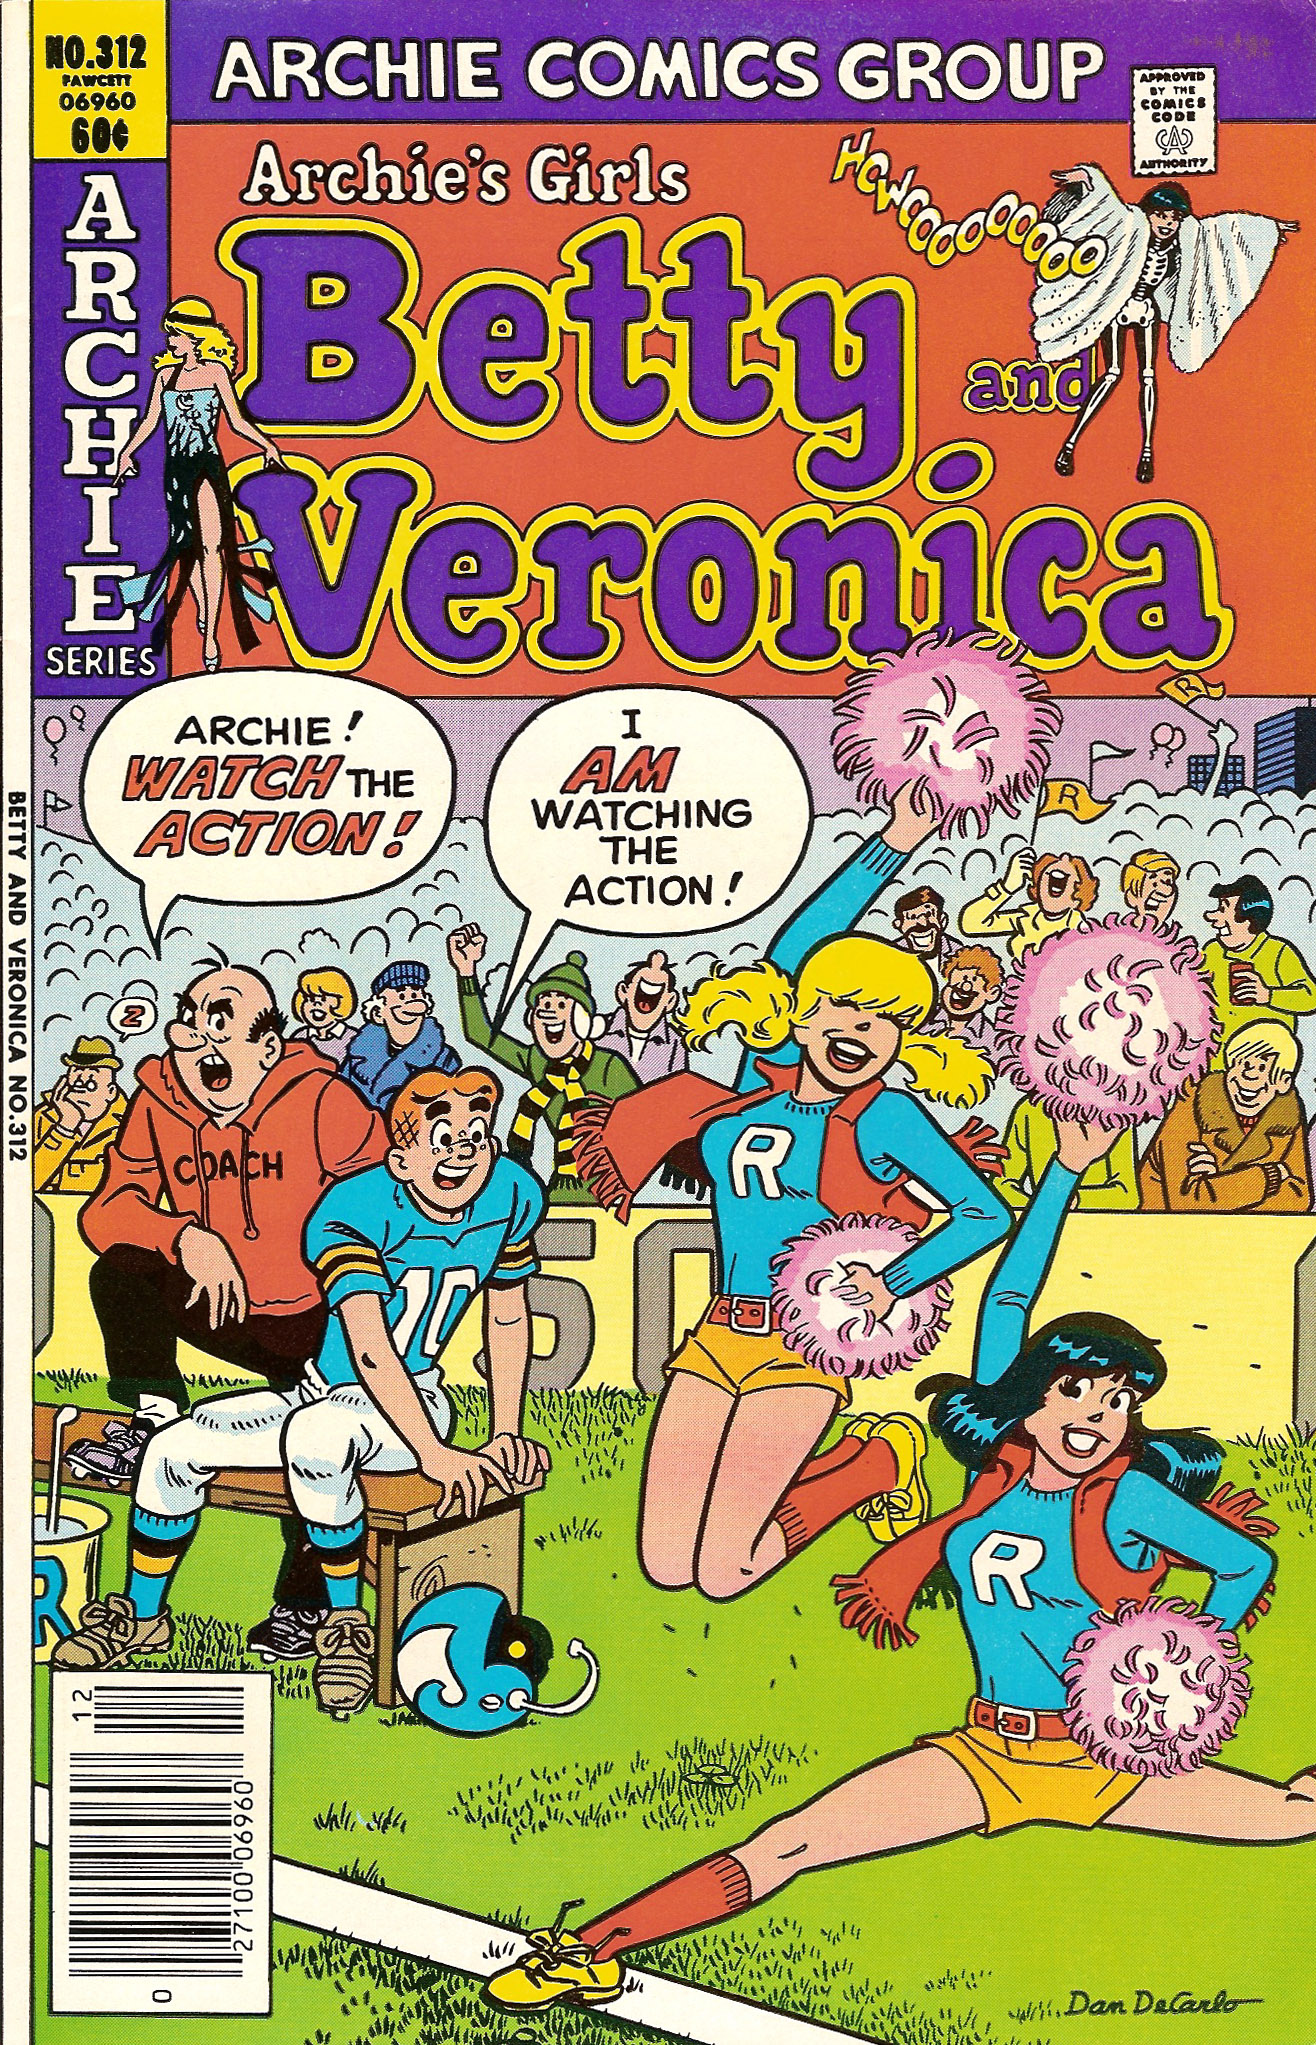 Read online Archie's Girls Betty and Veronica comic -  Issue #312 - 1